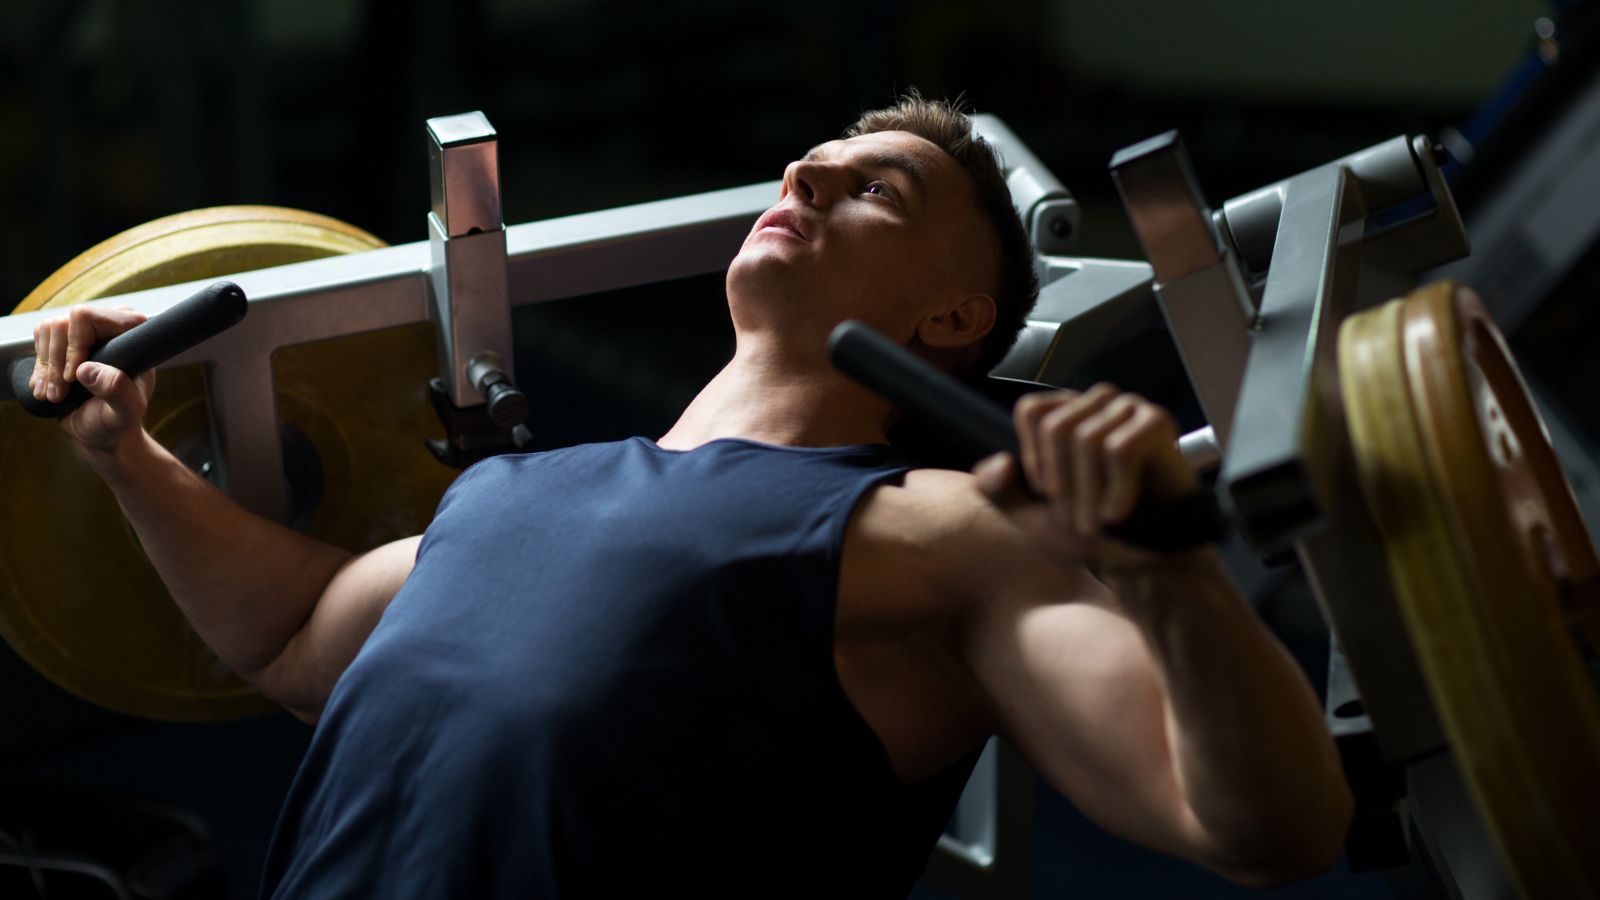 How to Use a Chest Press Machine: Benefits and Variations